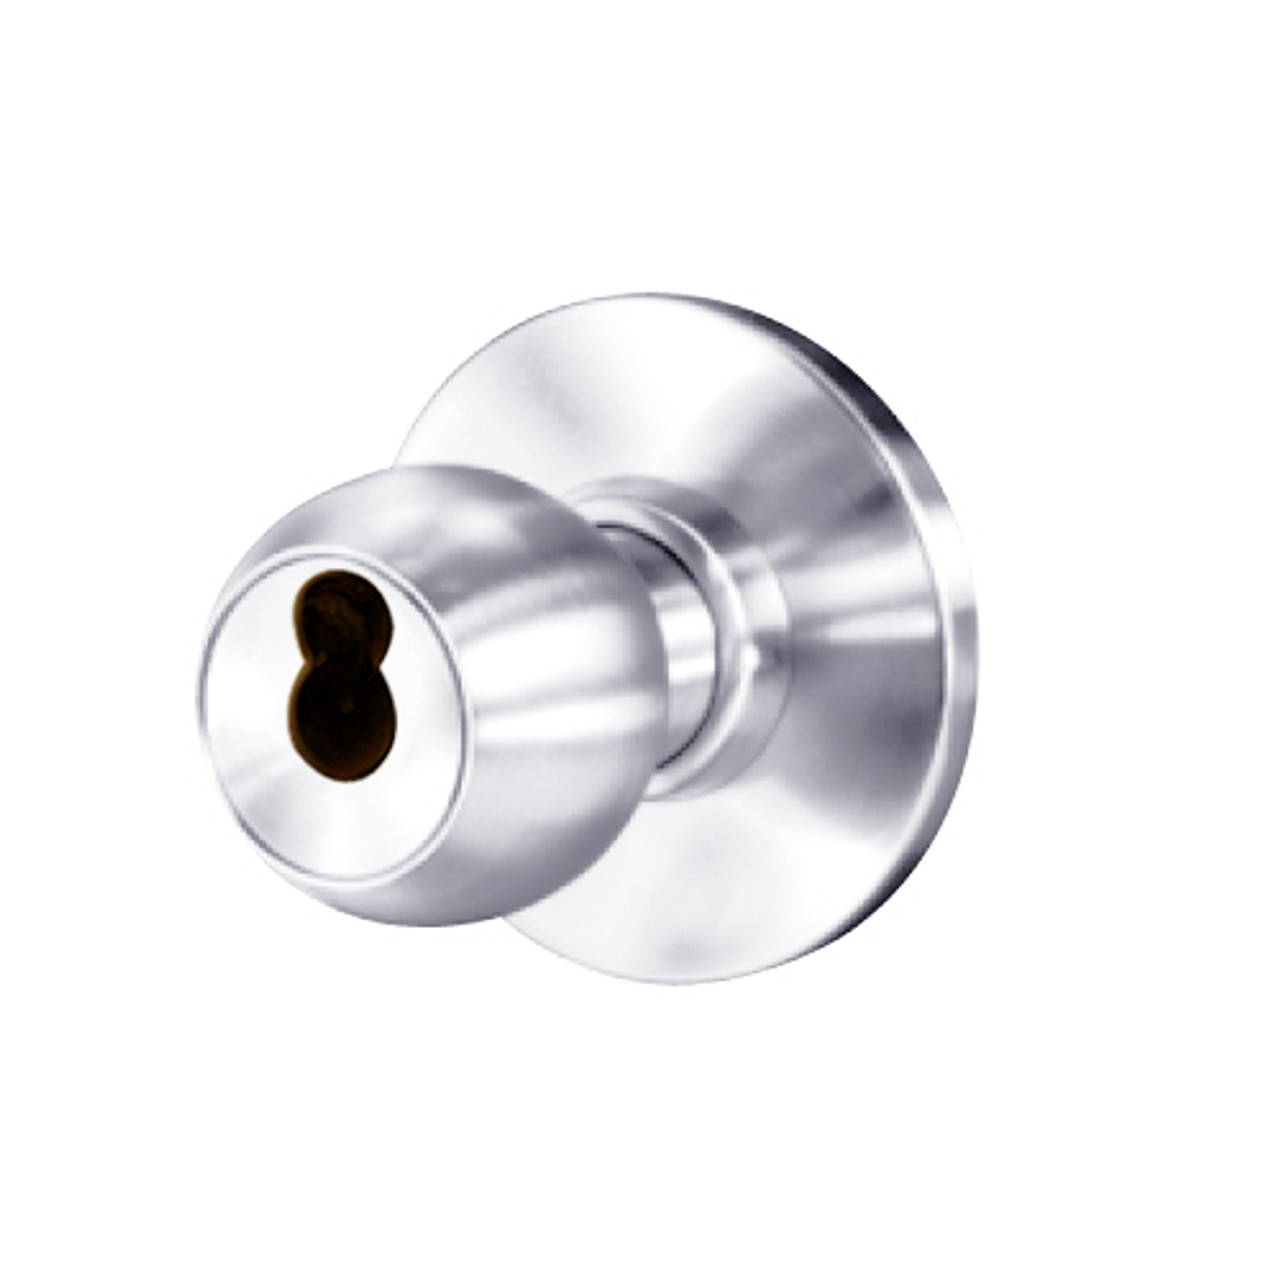 8K57S4AS3625 Best 8K Series Communicating Heavy Duty Cylindrical Knob Locks with Round Style in Bright Chrome